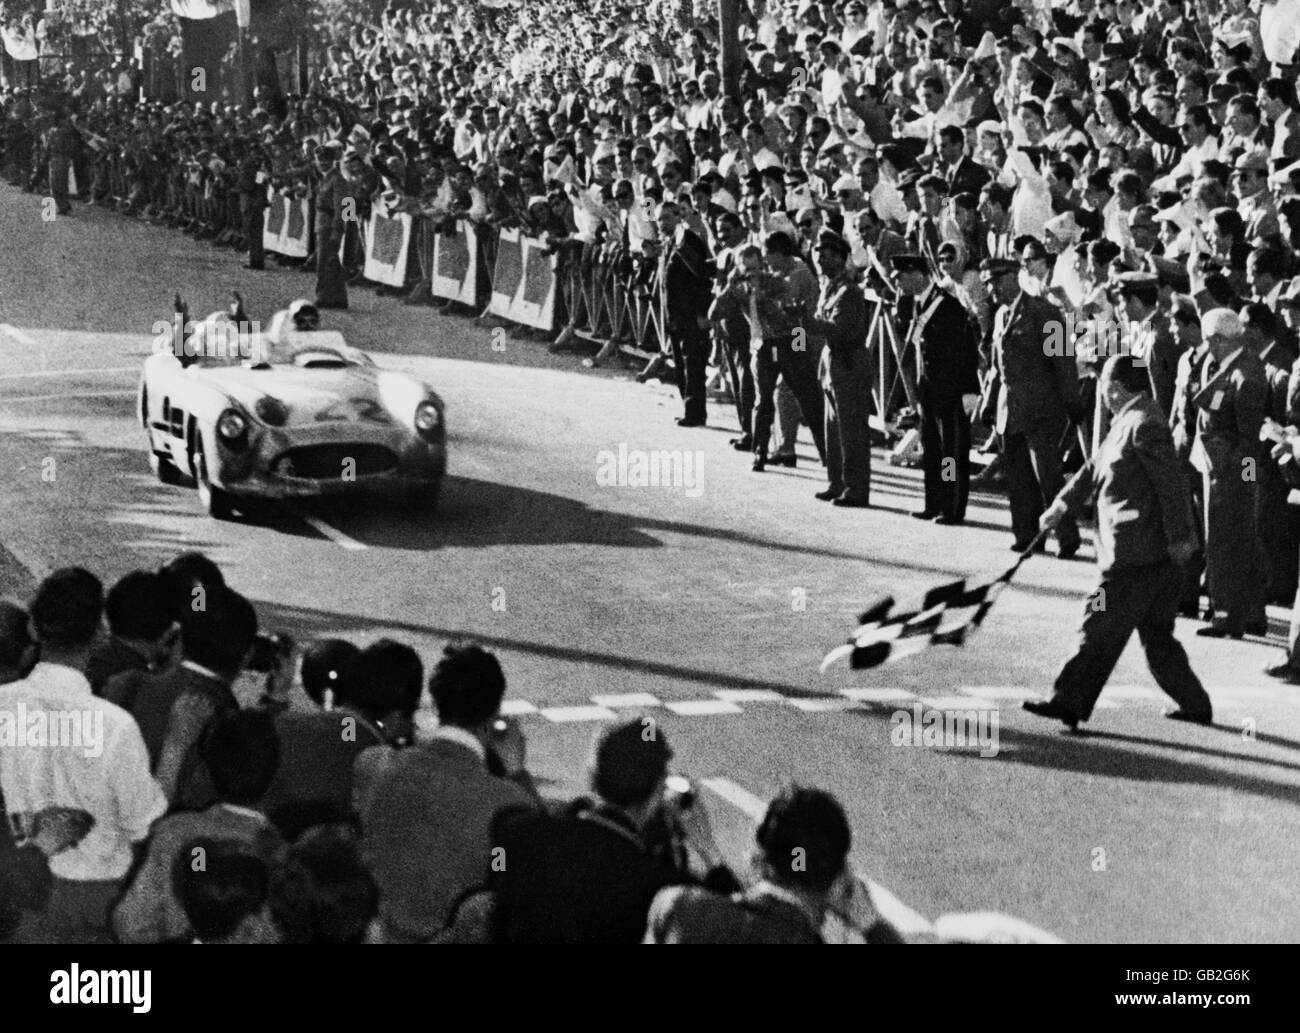 Stirling Moss the great British driver became the first Briton to win the the Great Italian Race, the Mille Miglia, a race that cover most of Italy he covered 994 miles in 10 hours 7 mins and 46 secs in his German Mercedes Benz to set a new record. Image shows Moss crossing the finishing line. Stock Photo